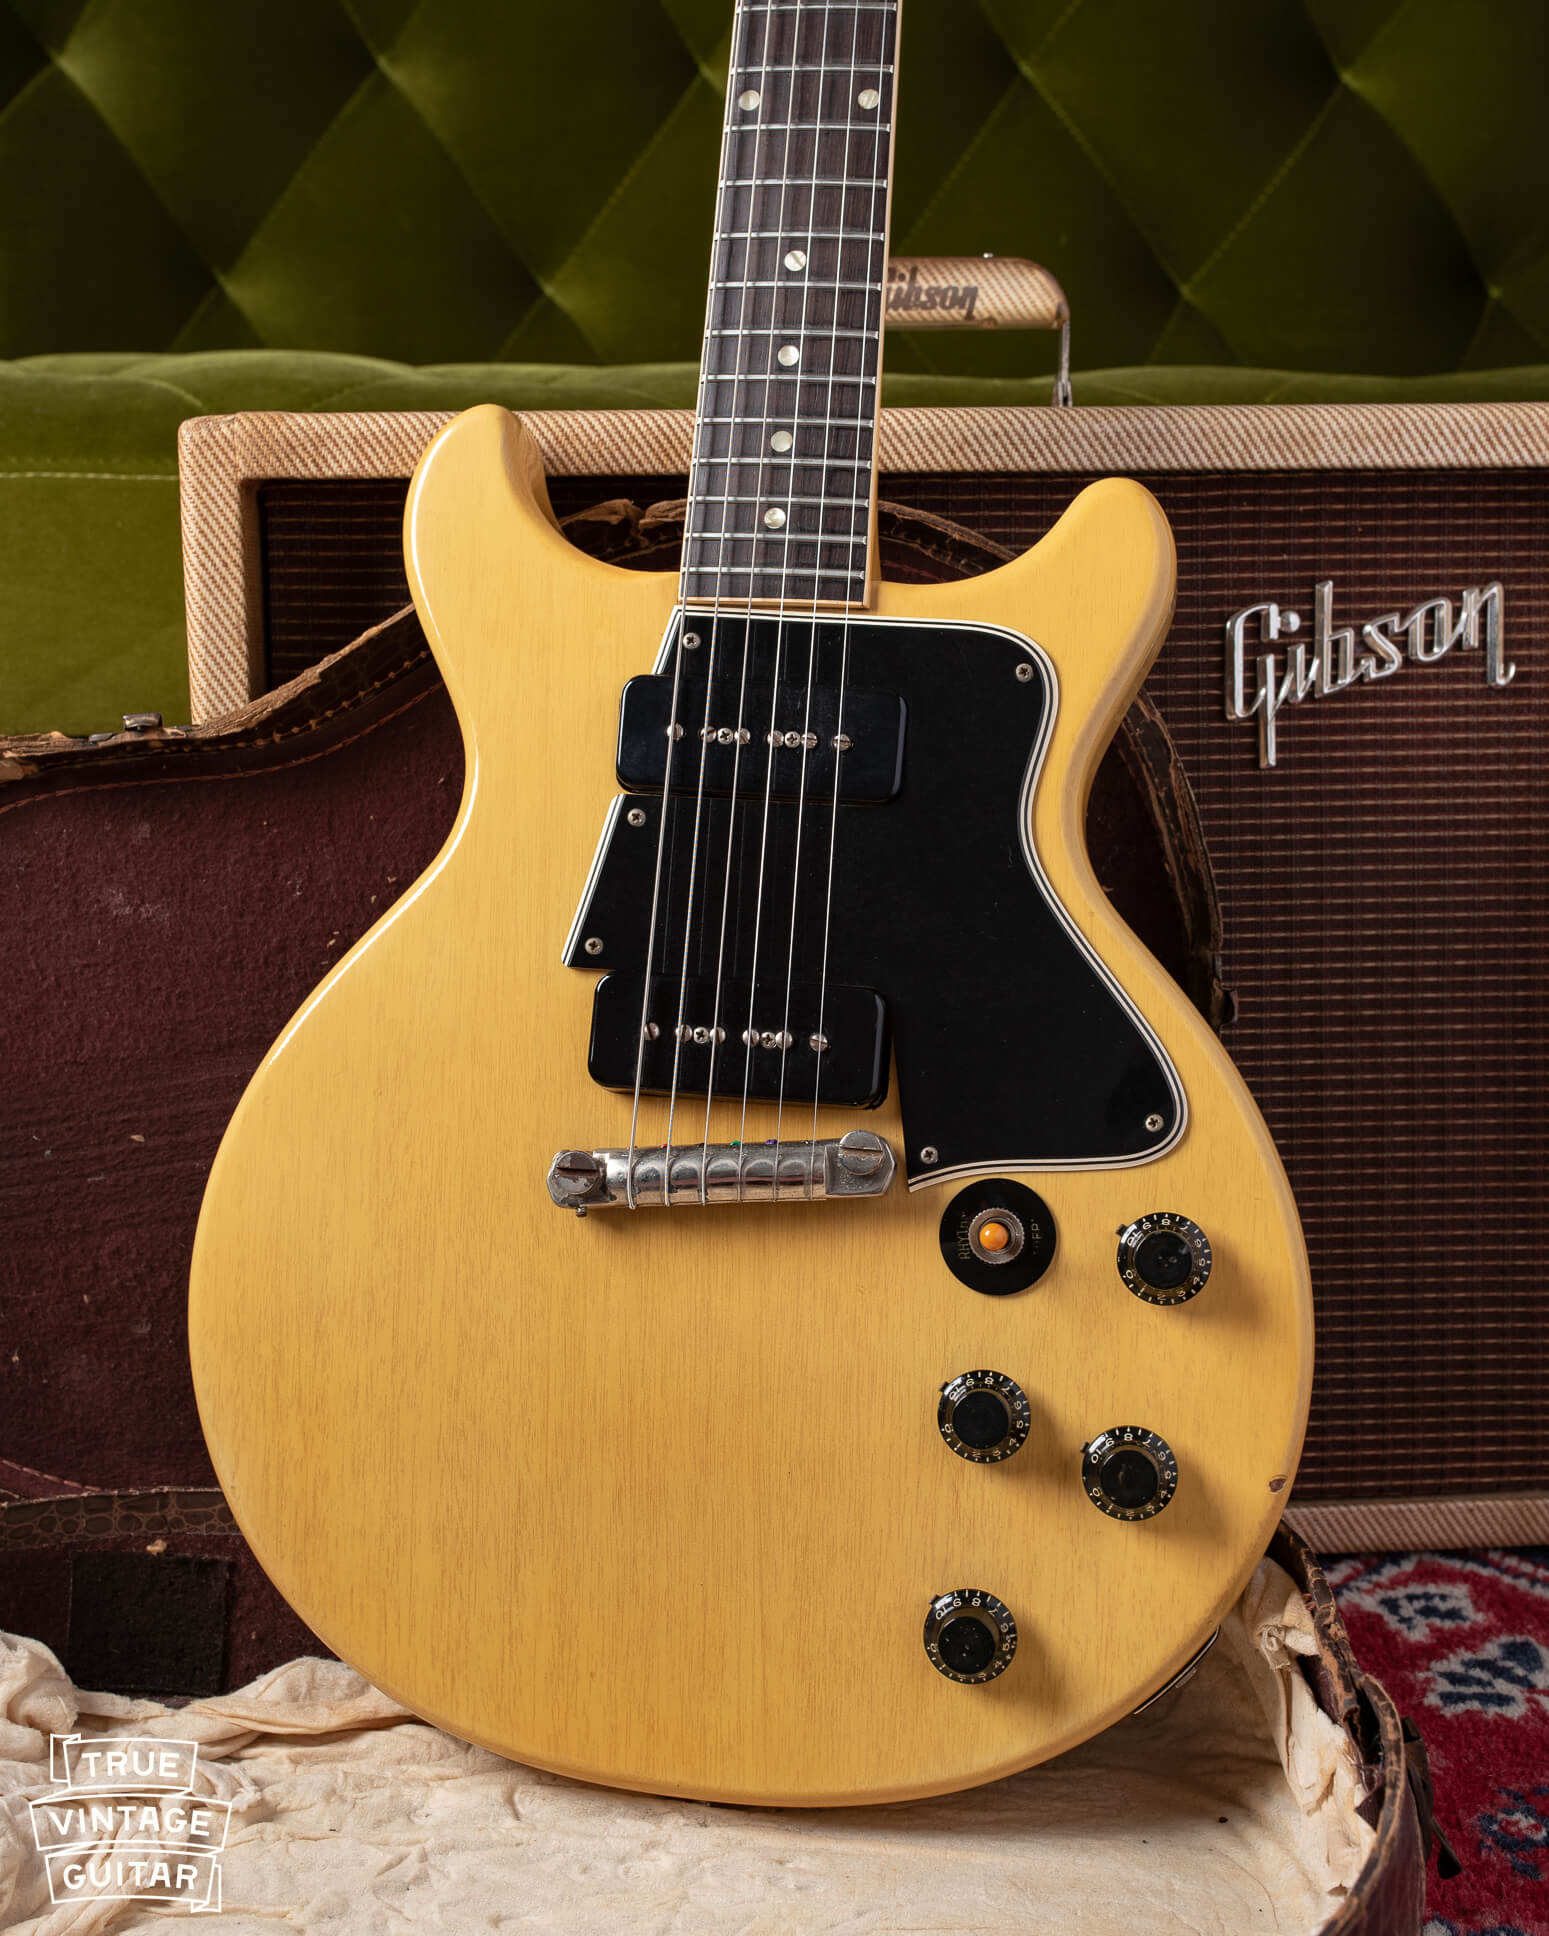 1960 Gibson Les Paul Special with double cutaway body style